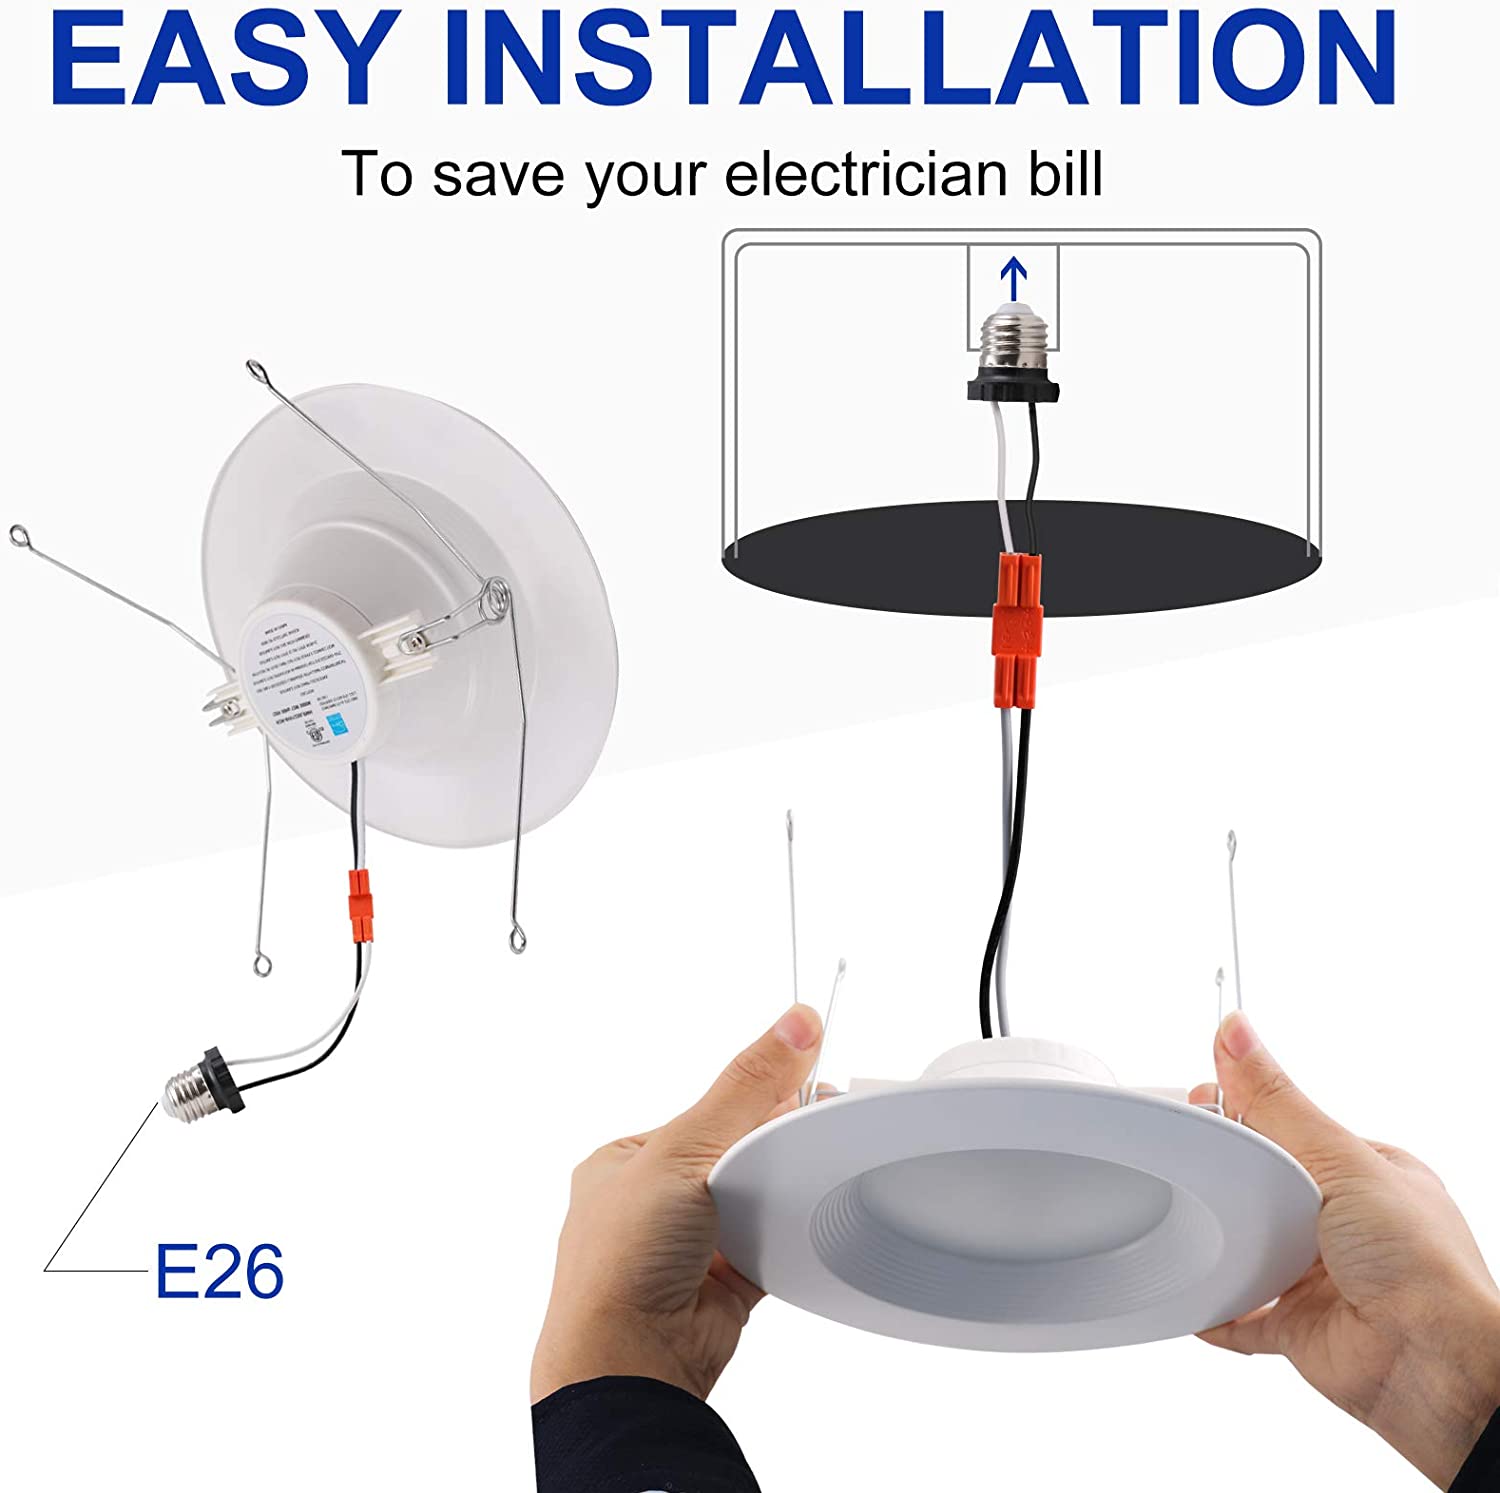 Energetic Dimmable LED Recessed Lighting 5/6 Inch Downlight, 12W=150W, Warm White 3000K, 1000LM, Energy Star & ETL, Simple Retrofit Installation, Baffle Trim, Damp Rated, 12 Pack